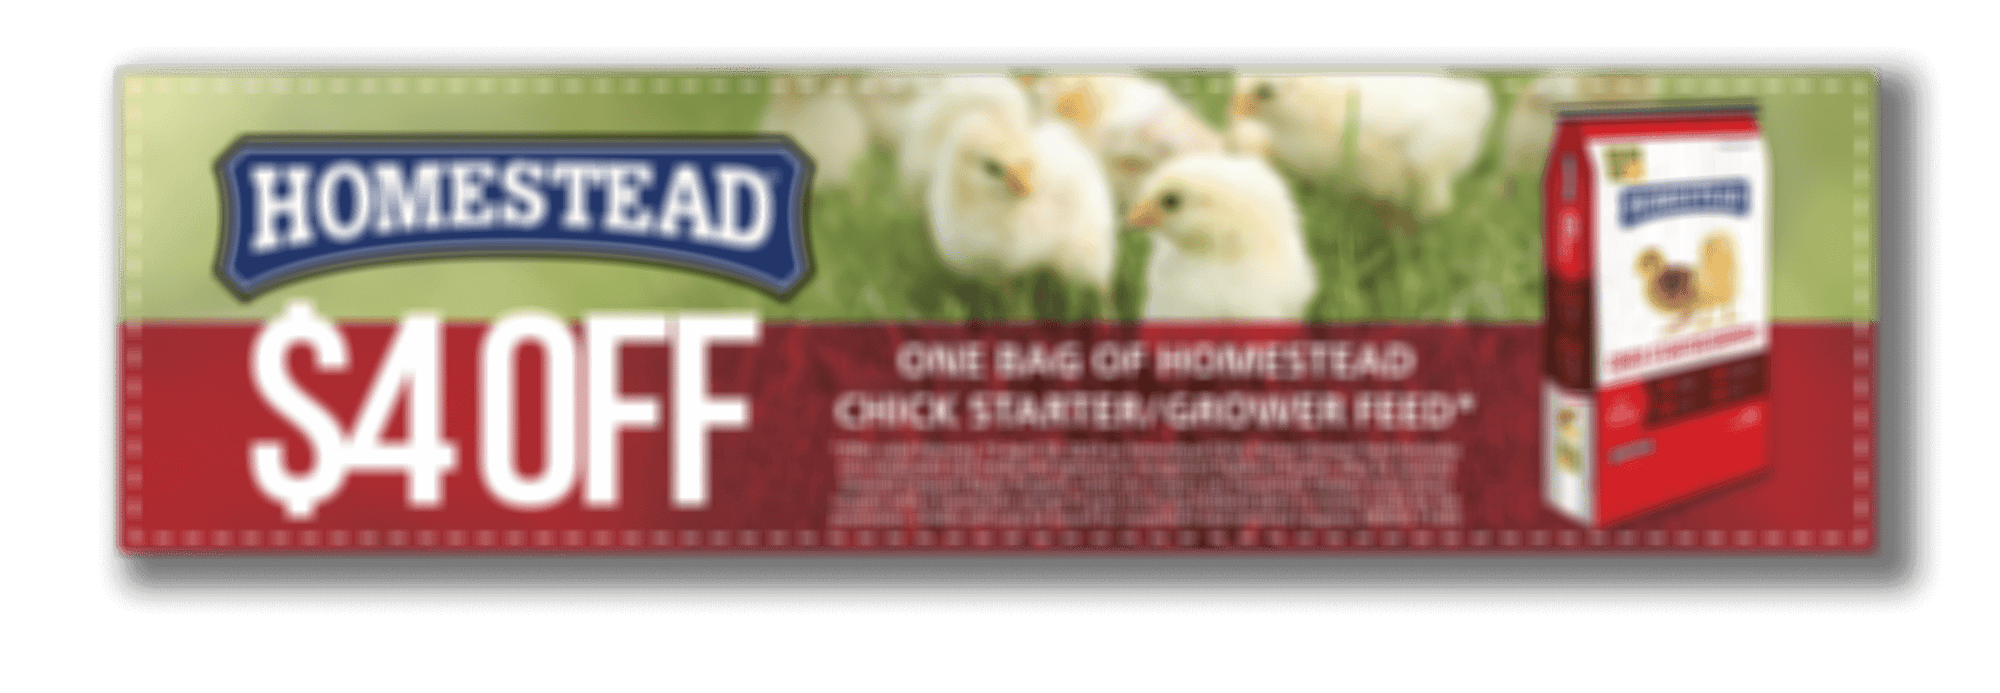 Homestead-Chick-Days-Digital-Coupon_$4OFF_2024-drop-shadow-blur